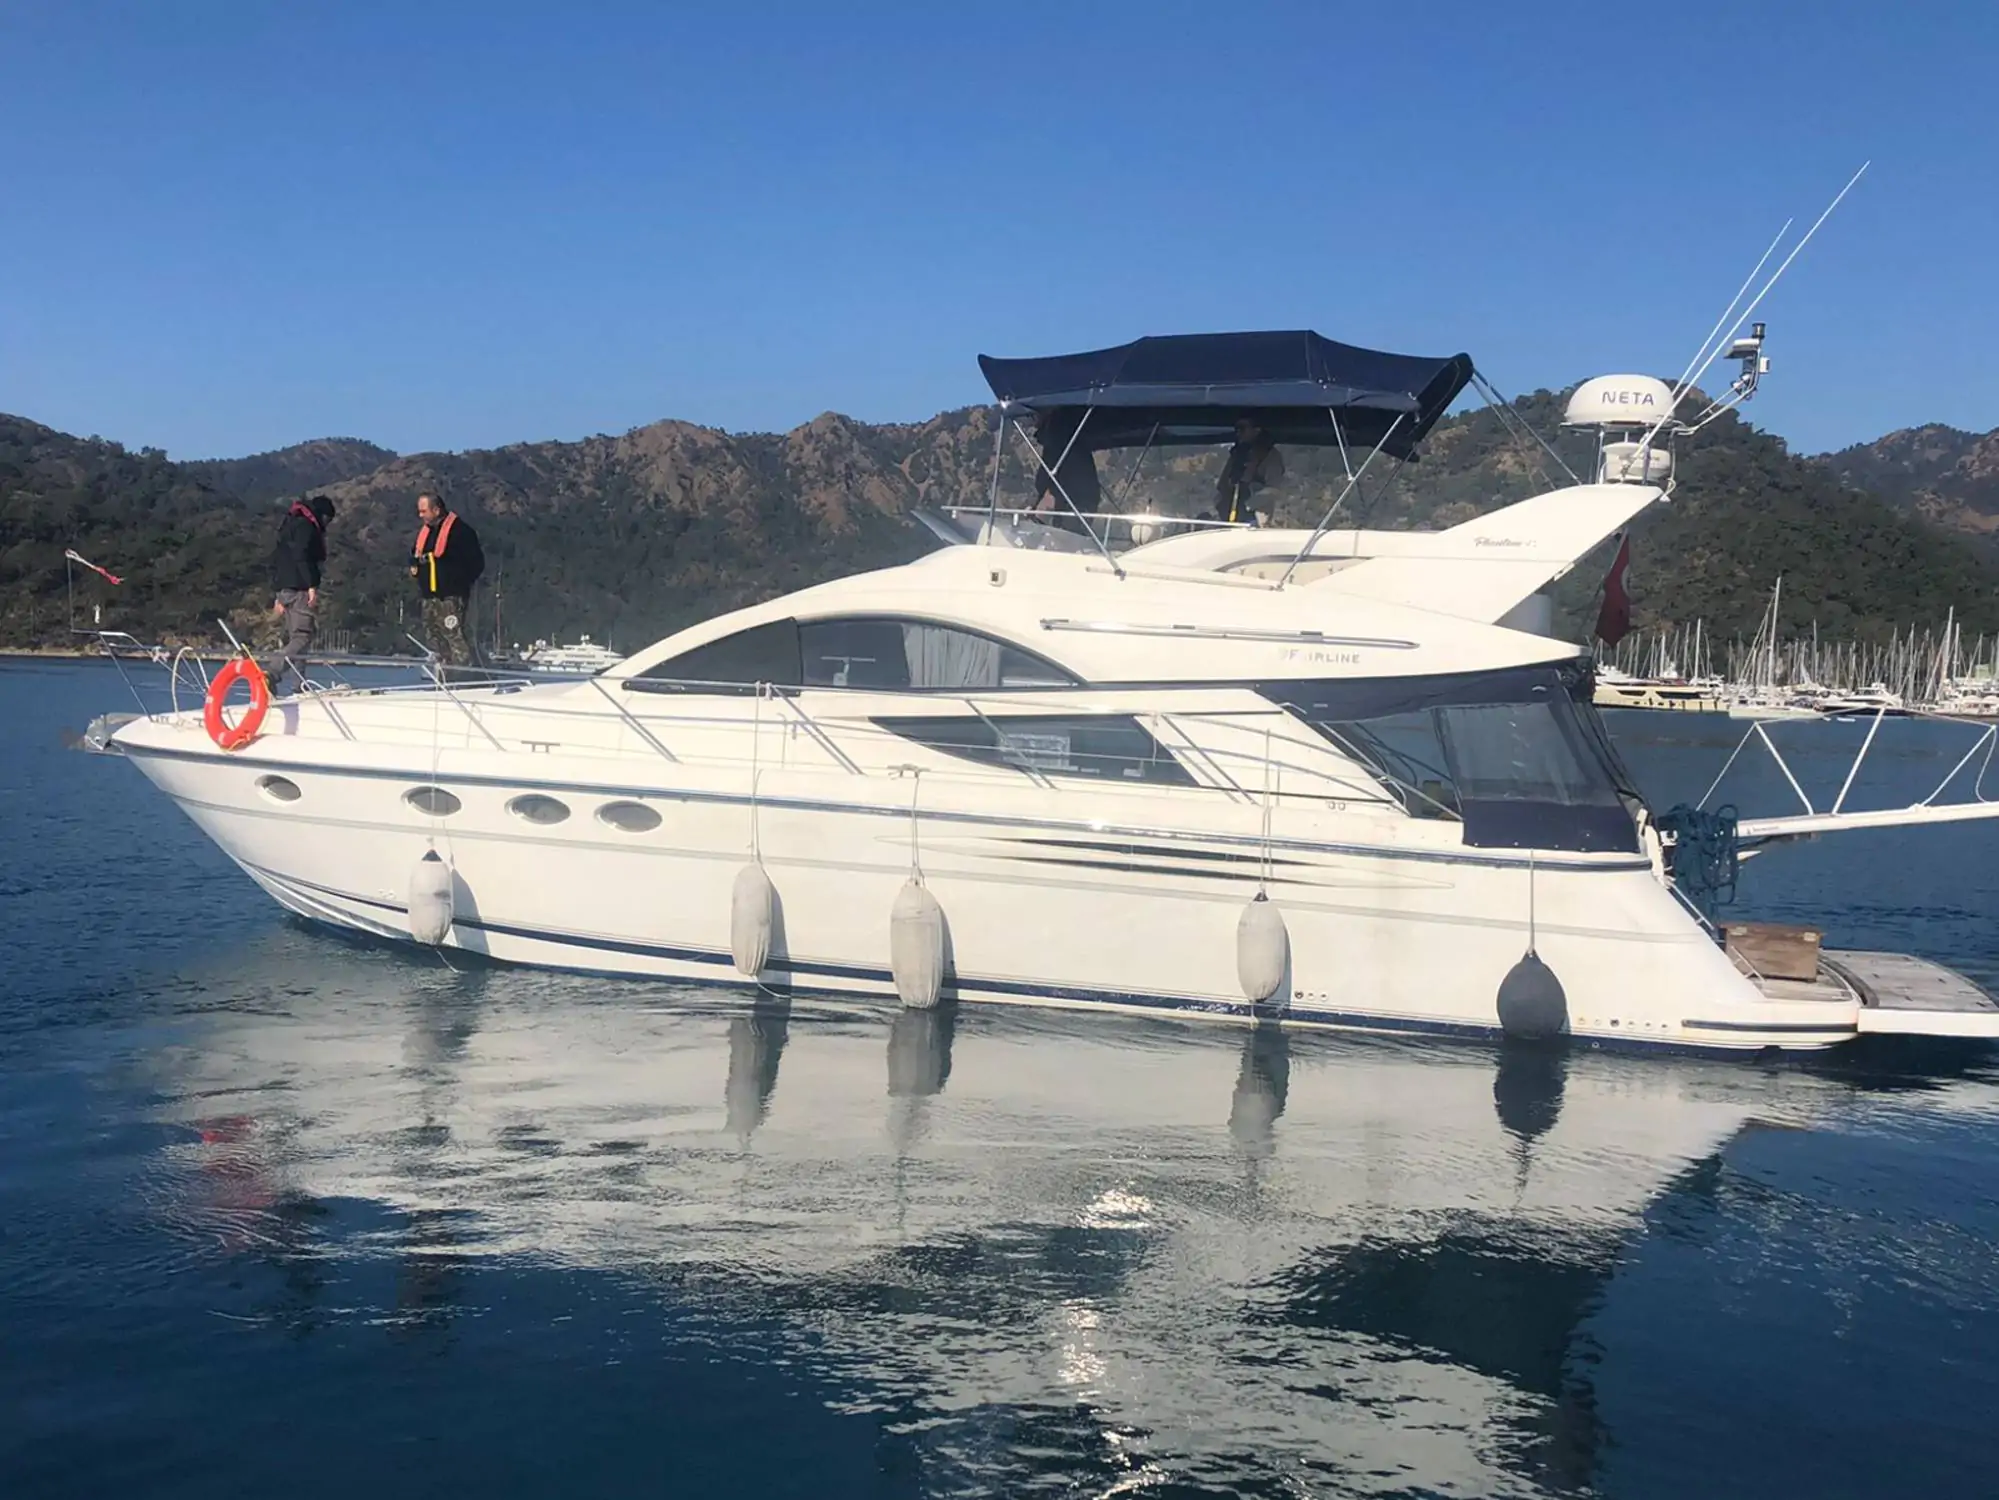 Daily or Weekly Yacht Charters in the Bays of Göcek